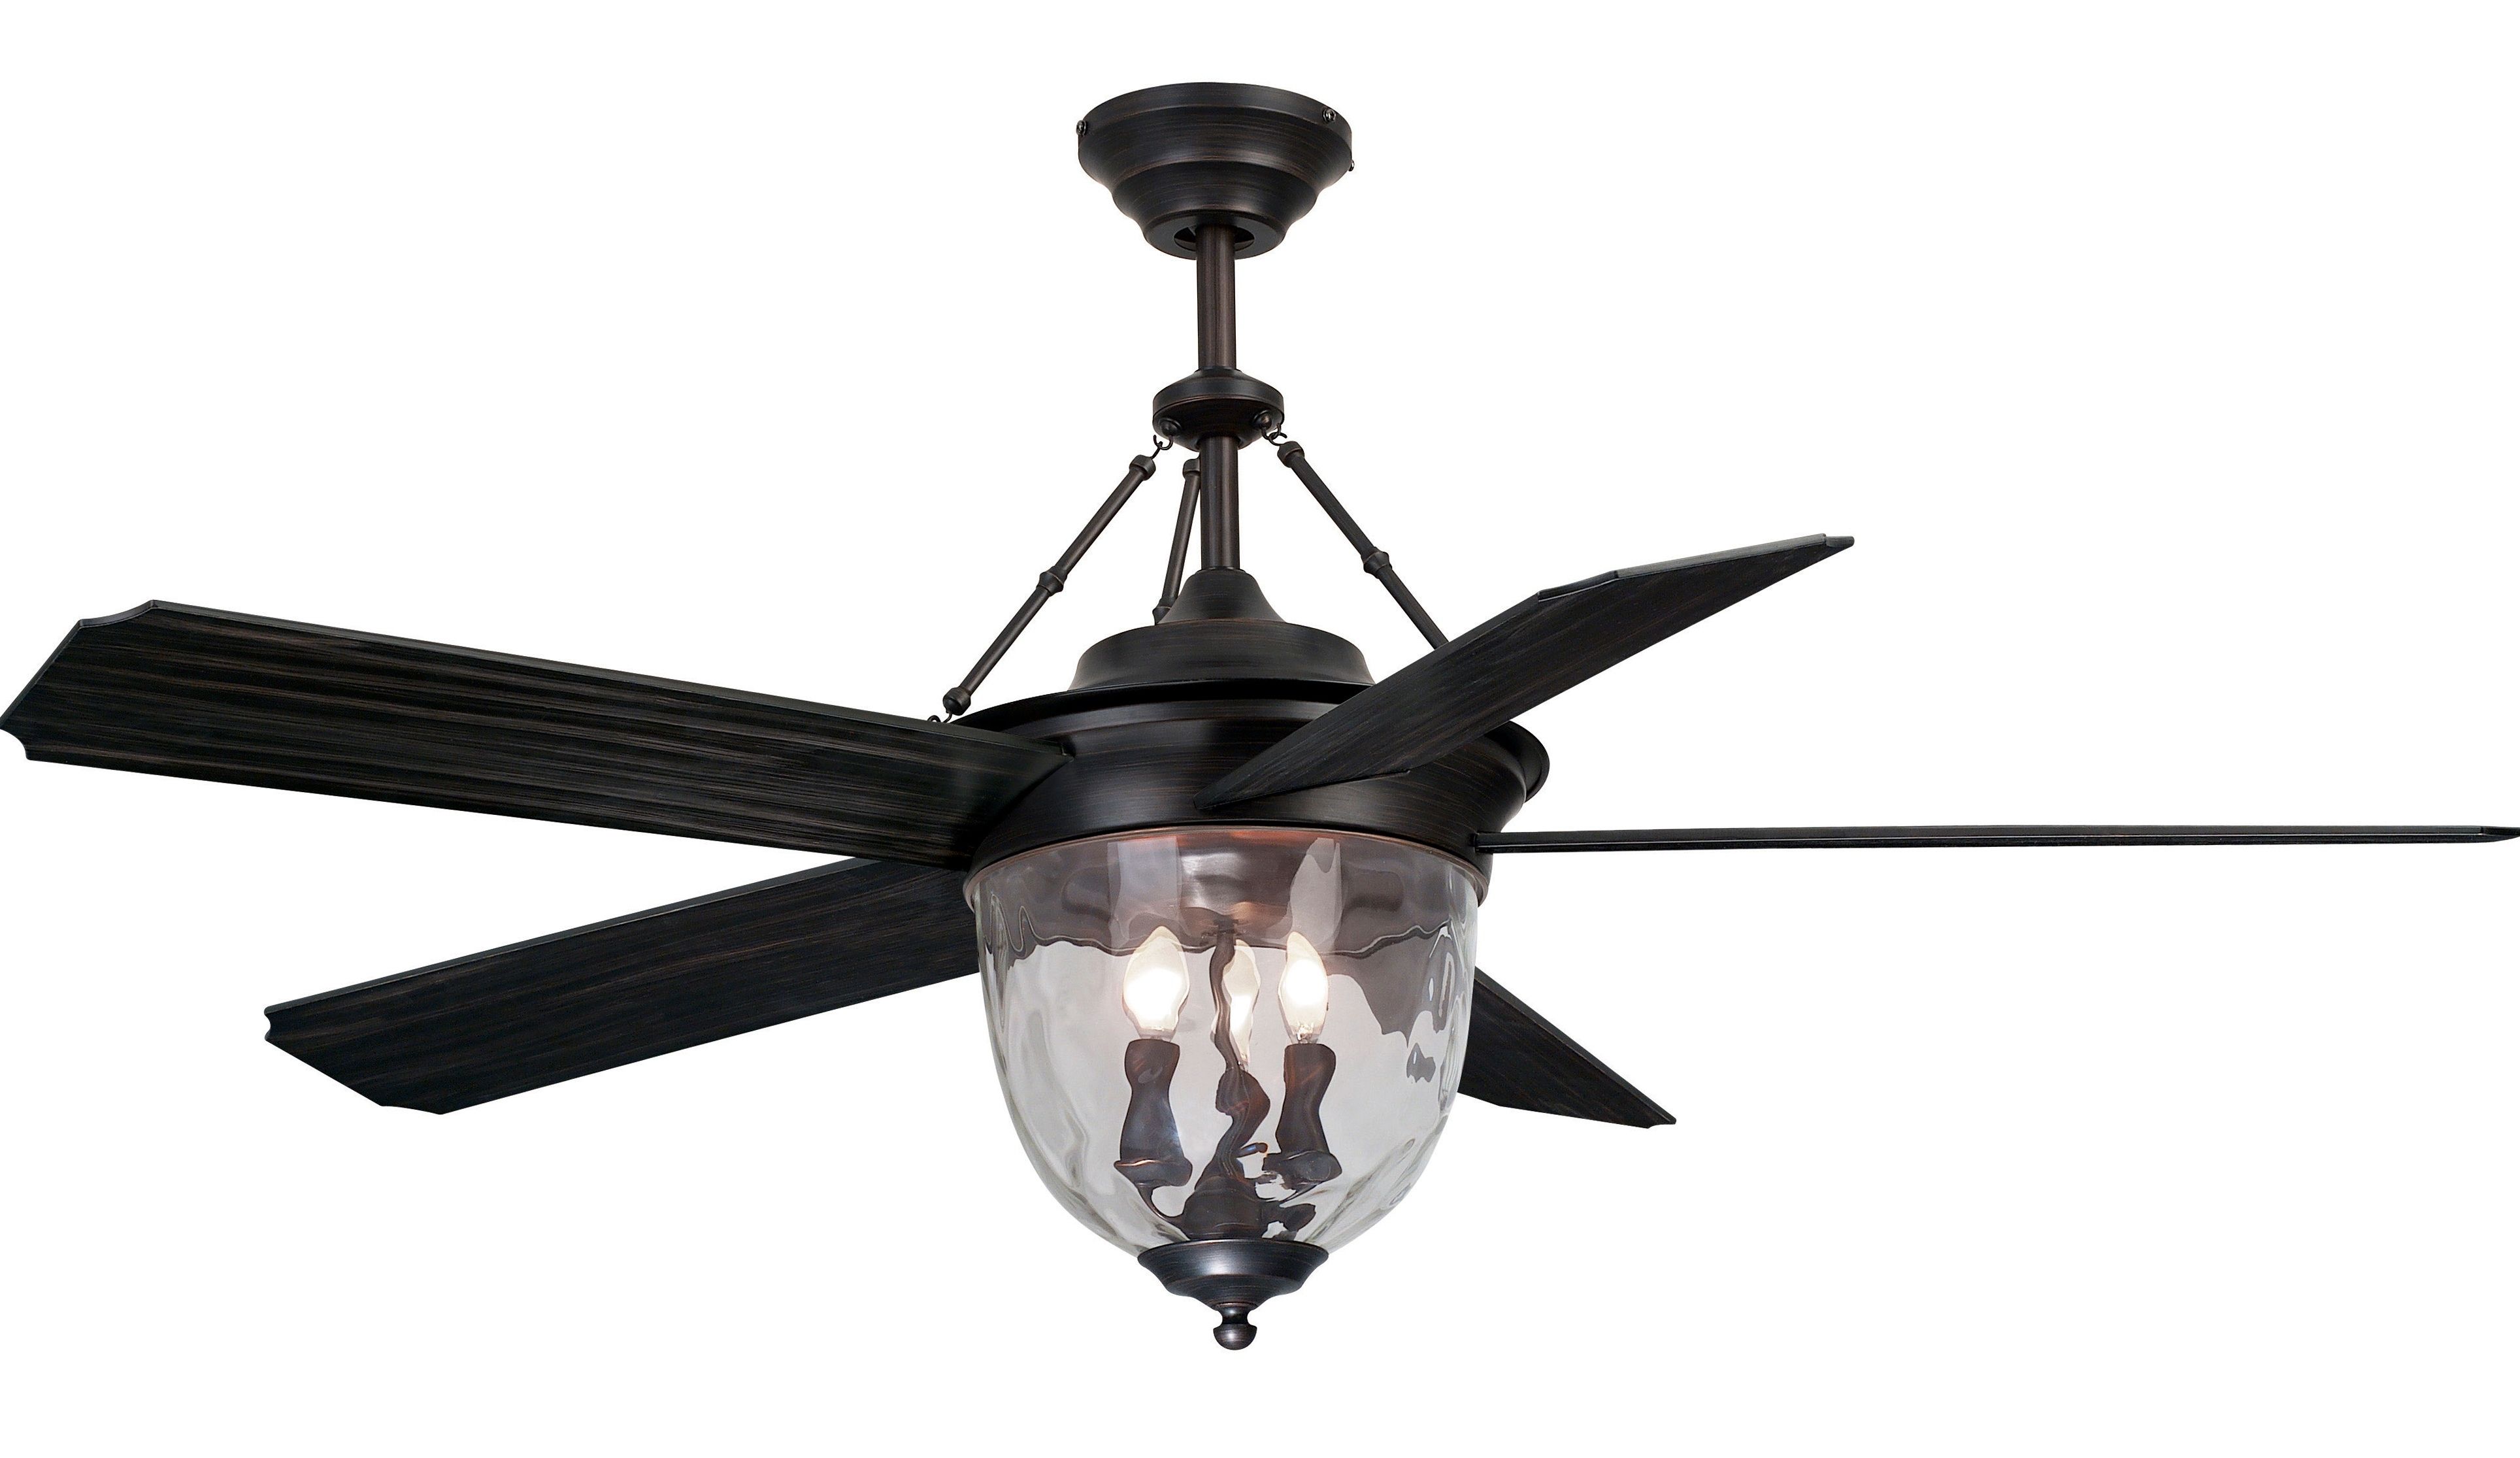 Outdoor: Amusing Lowes Ceiling Fans With Lights Lowes Lighting In Black Outdoor Ceiling Fans With Light (View 9 of 15)